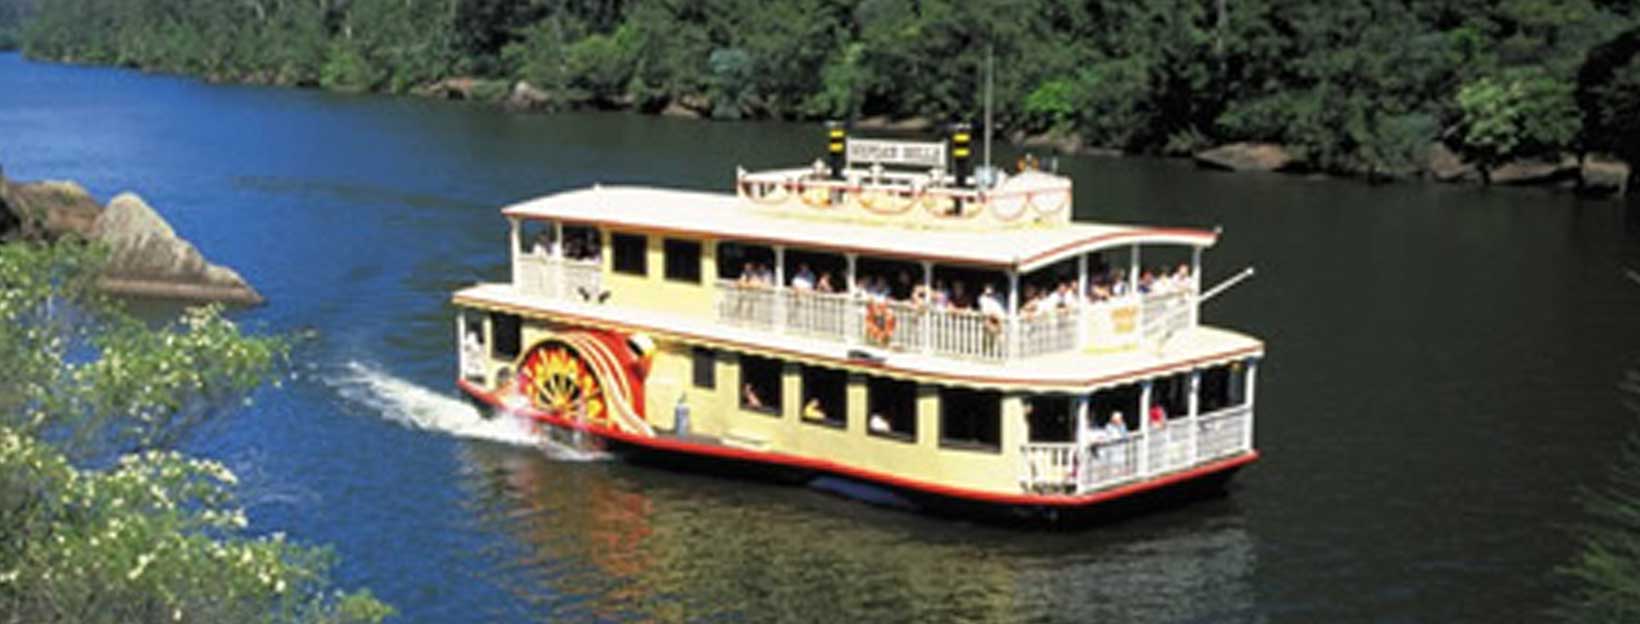 image of Belle on the river